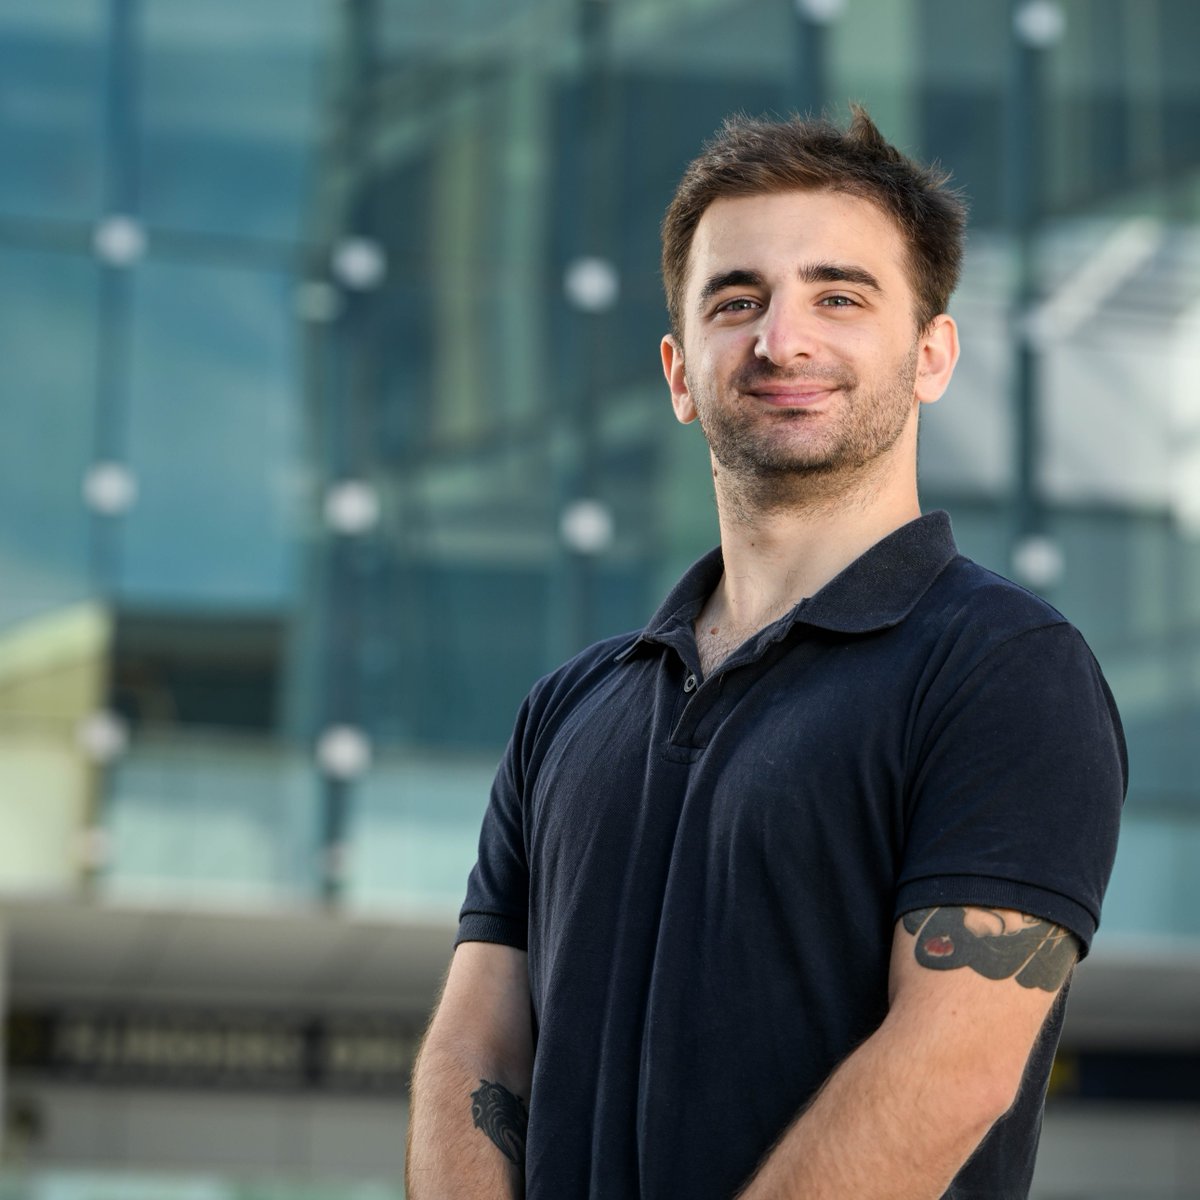 “I wouldn’t be where I am today without the help of this scholarship,” says Robert. A dream and donor support has changed the trajectory for a science graduate from generational poverty. Read Robert's story 👉 bit.ly/3Uj6rAO